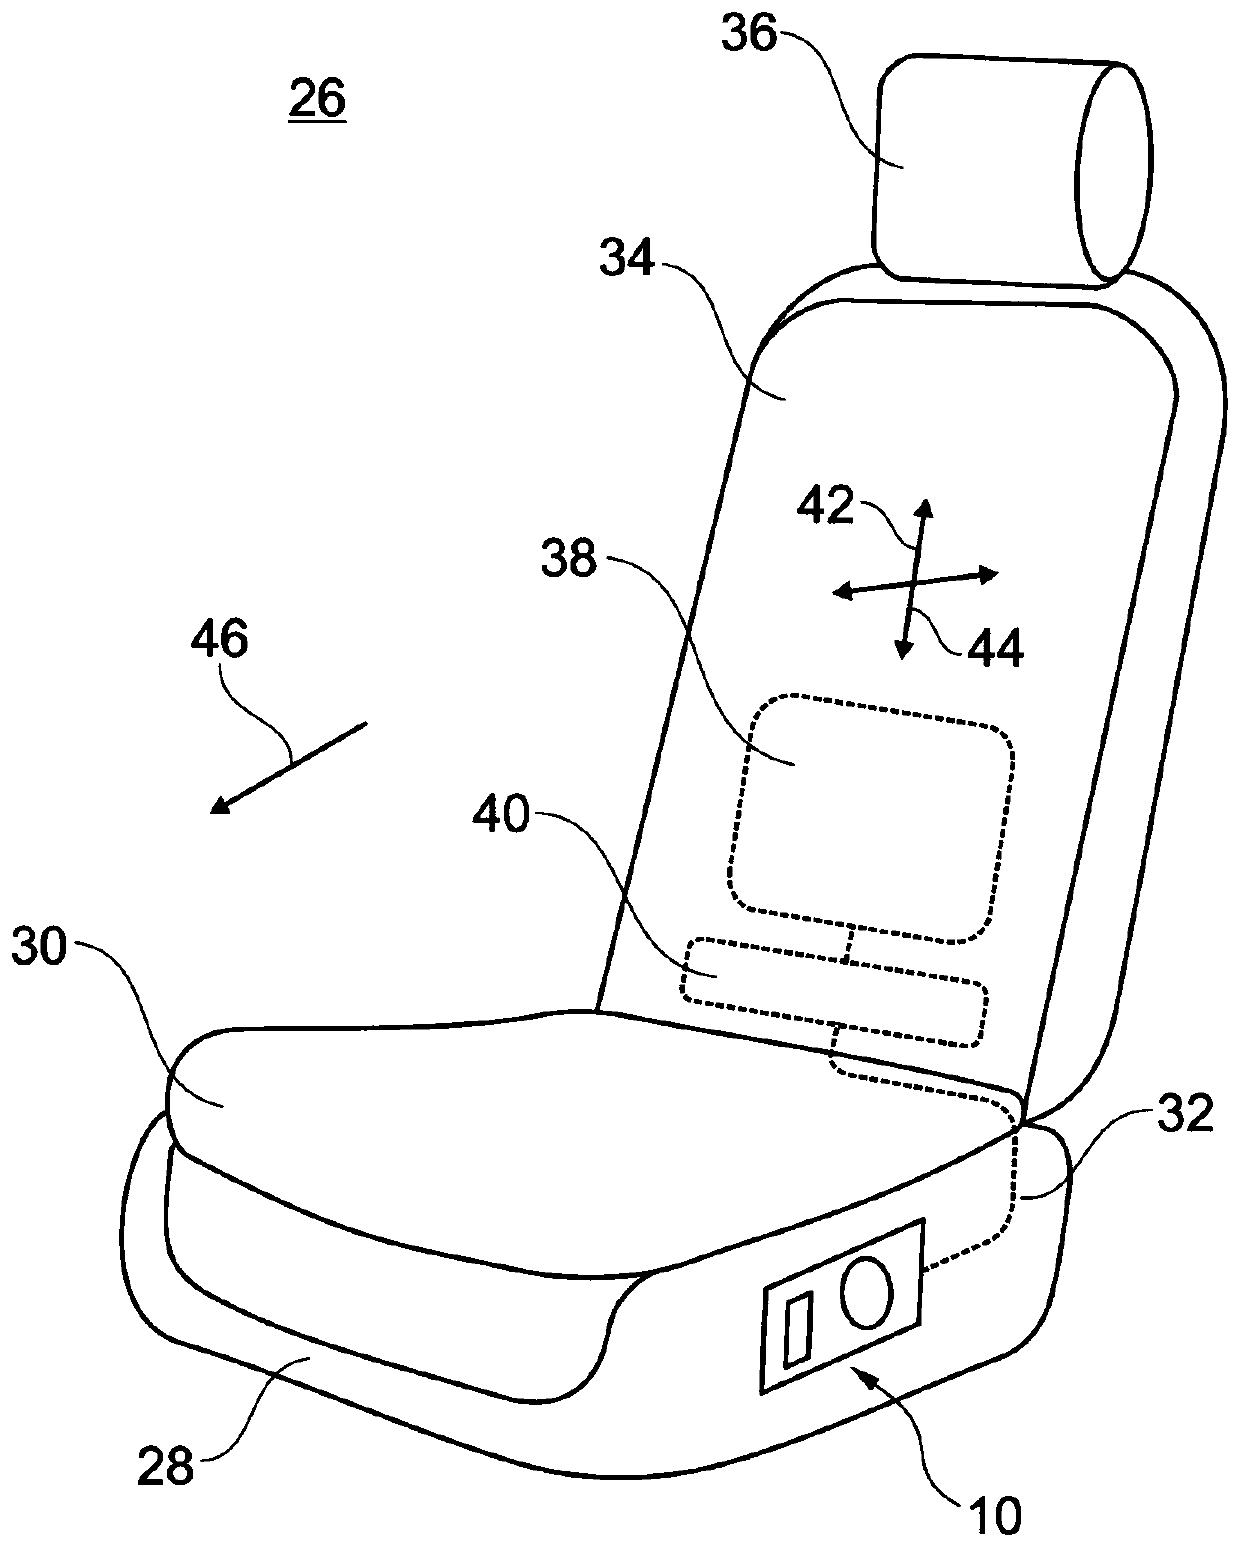 Operator control unit that controls an electrically adjustable lumbar support of a motor vehicle seat